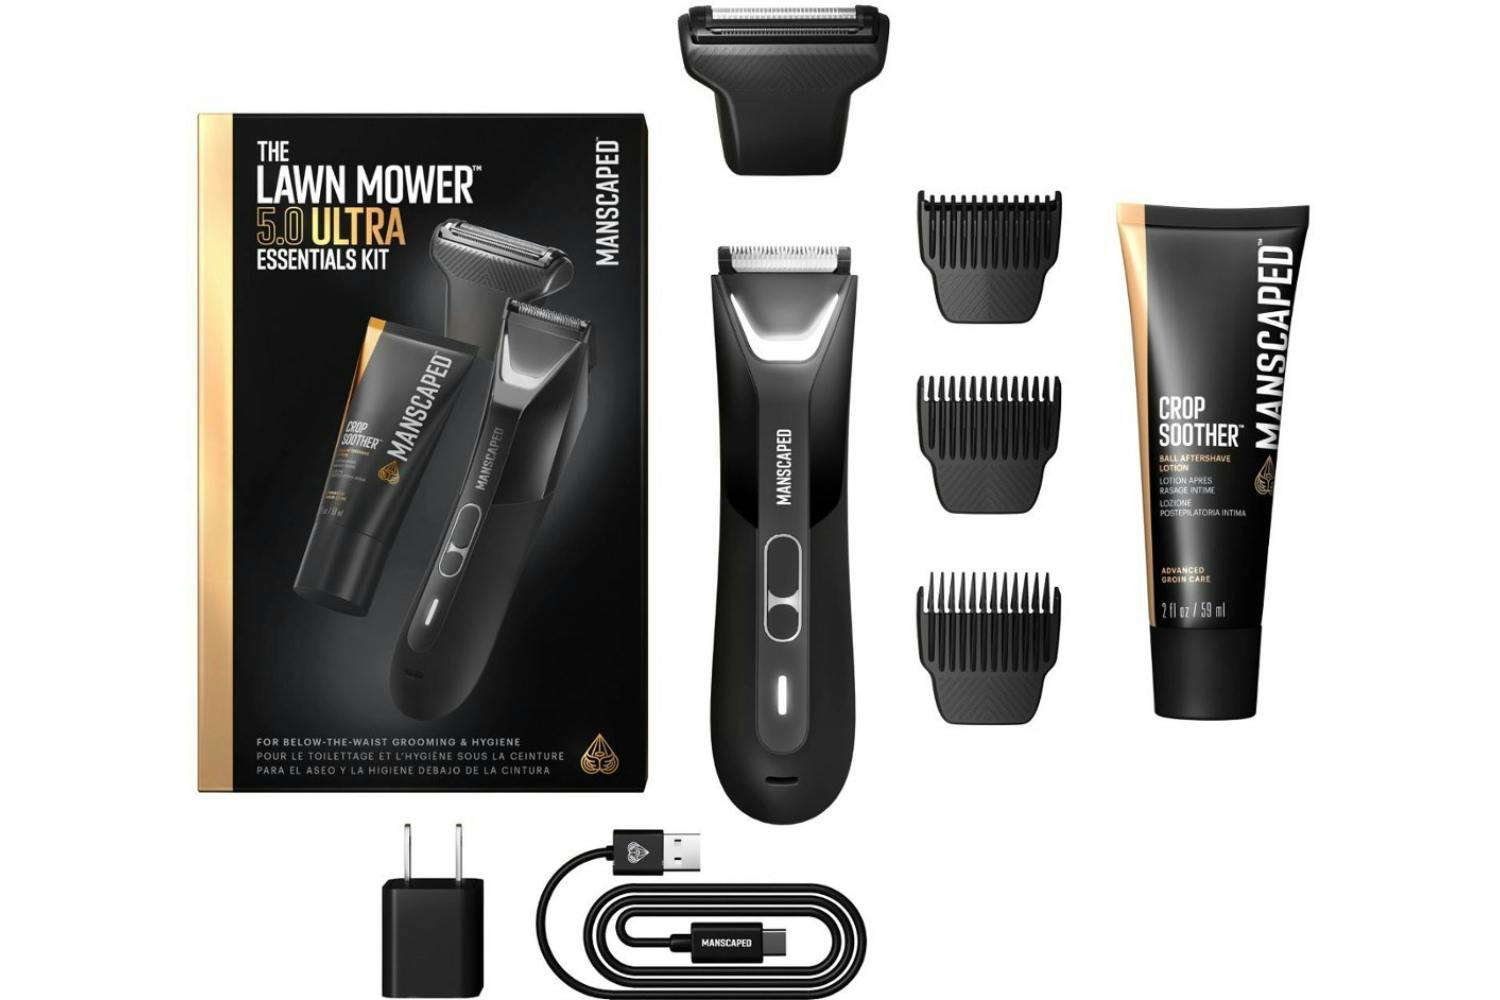 Manscaped The Lawn Mower 5.0 Ultra Hair Trimmer Essentials Kit | 75-00015